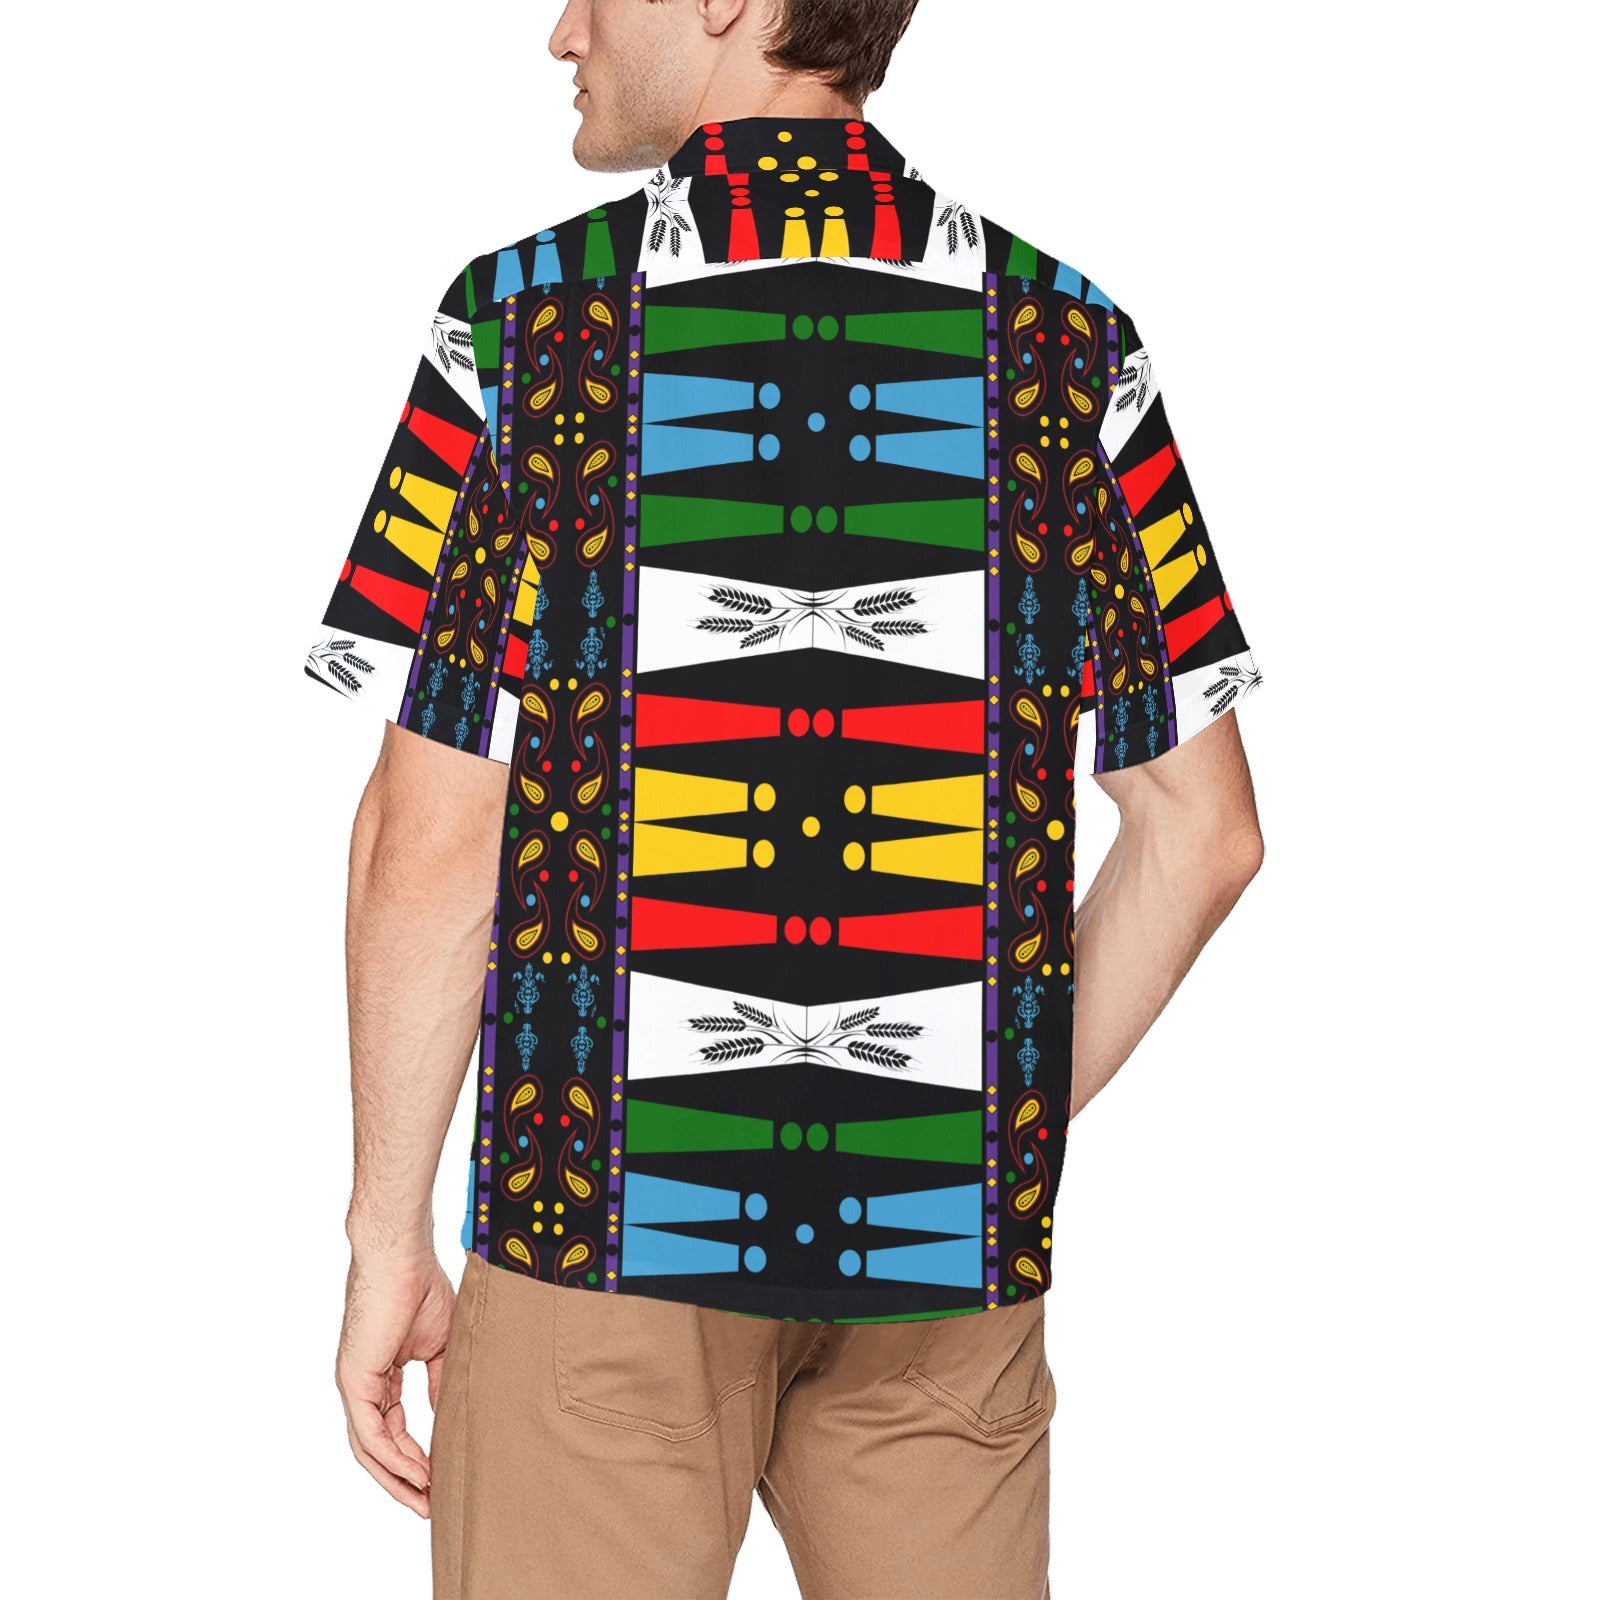 Men's shirt With Chest Pocket "Native Print" for 2022